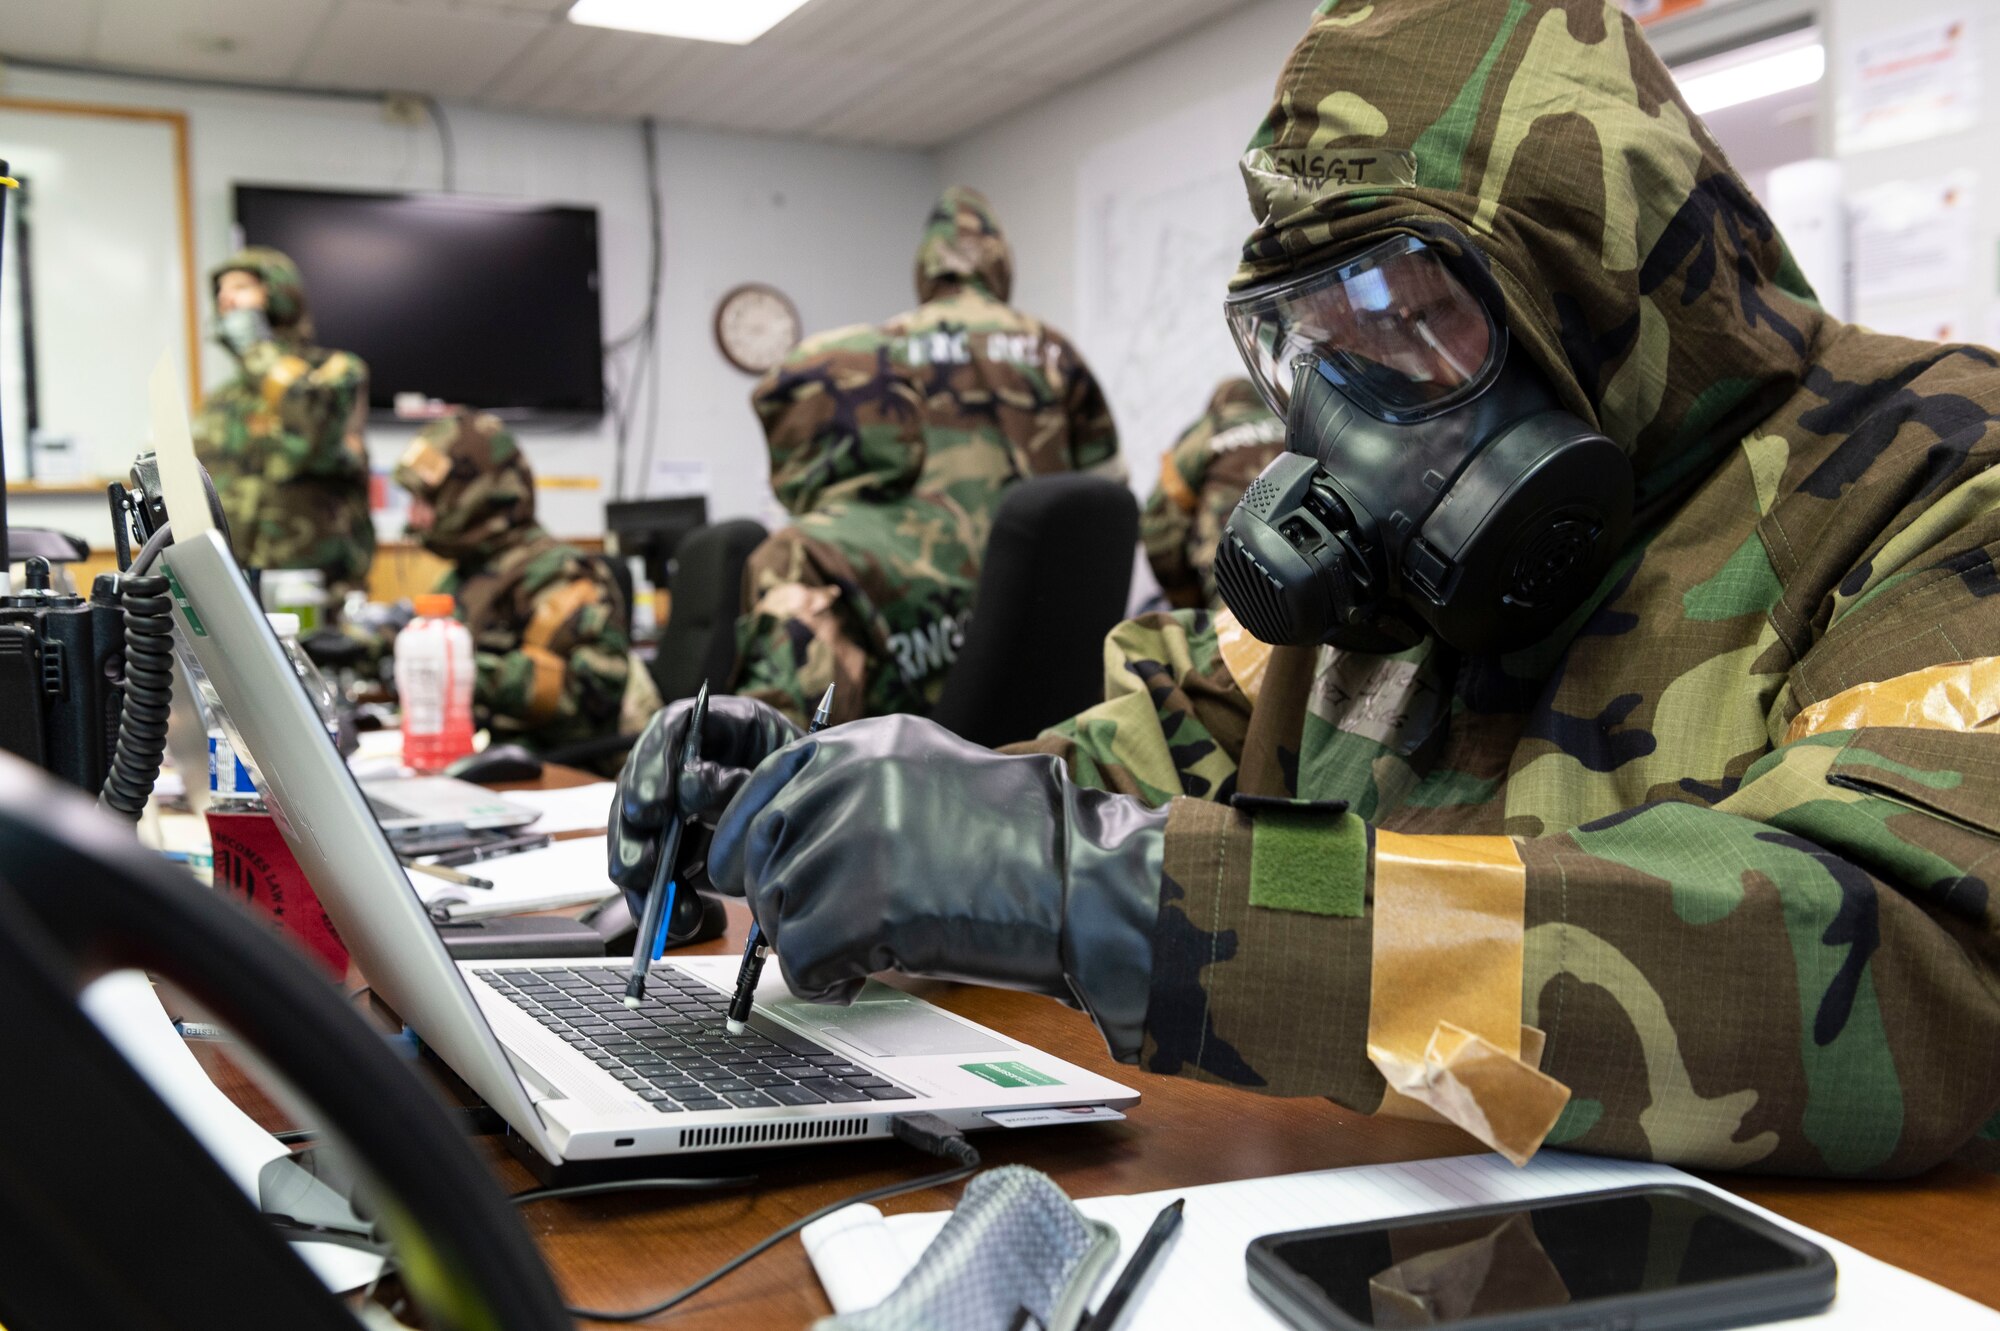 U.S. Air Force Senior Master Sgt. Dave Twigg, 167th Operations Group, maintains operations while wearing mission oriented protective gear in the emergency operation center during a readiness exercise for the 167th Airlift Wing at Shepherd Field, Martinsburg, West Virginia, Aug. 10, 2023,